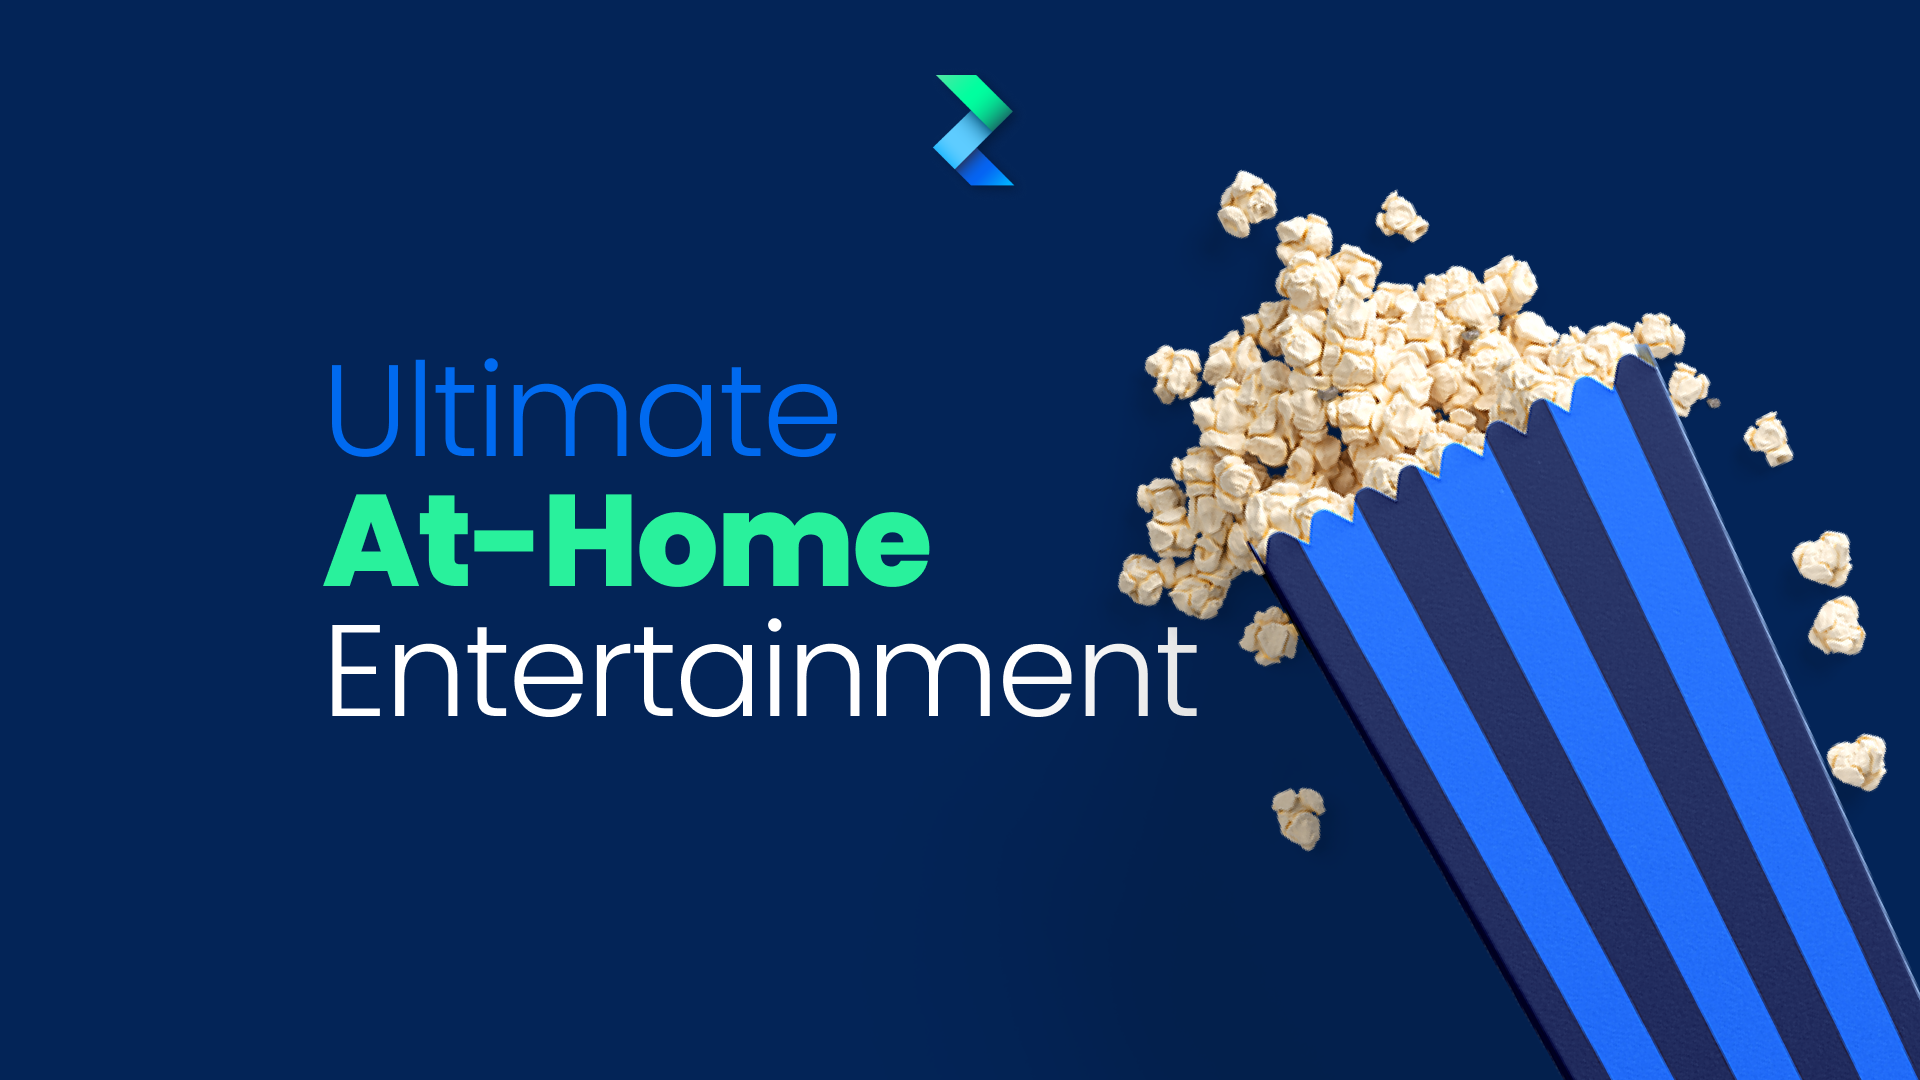 Create The Ultimate At-Home Entertainment Experience